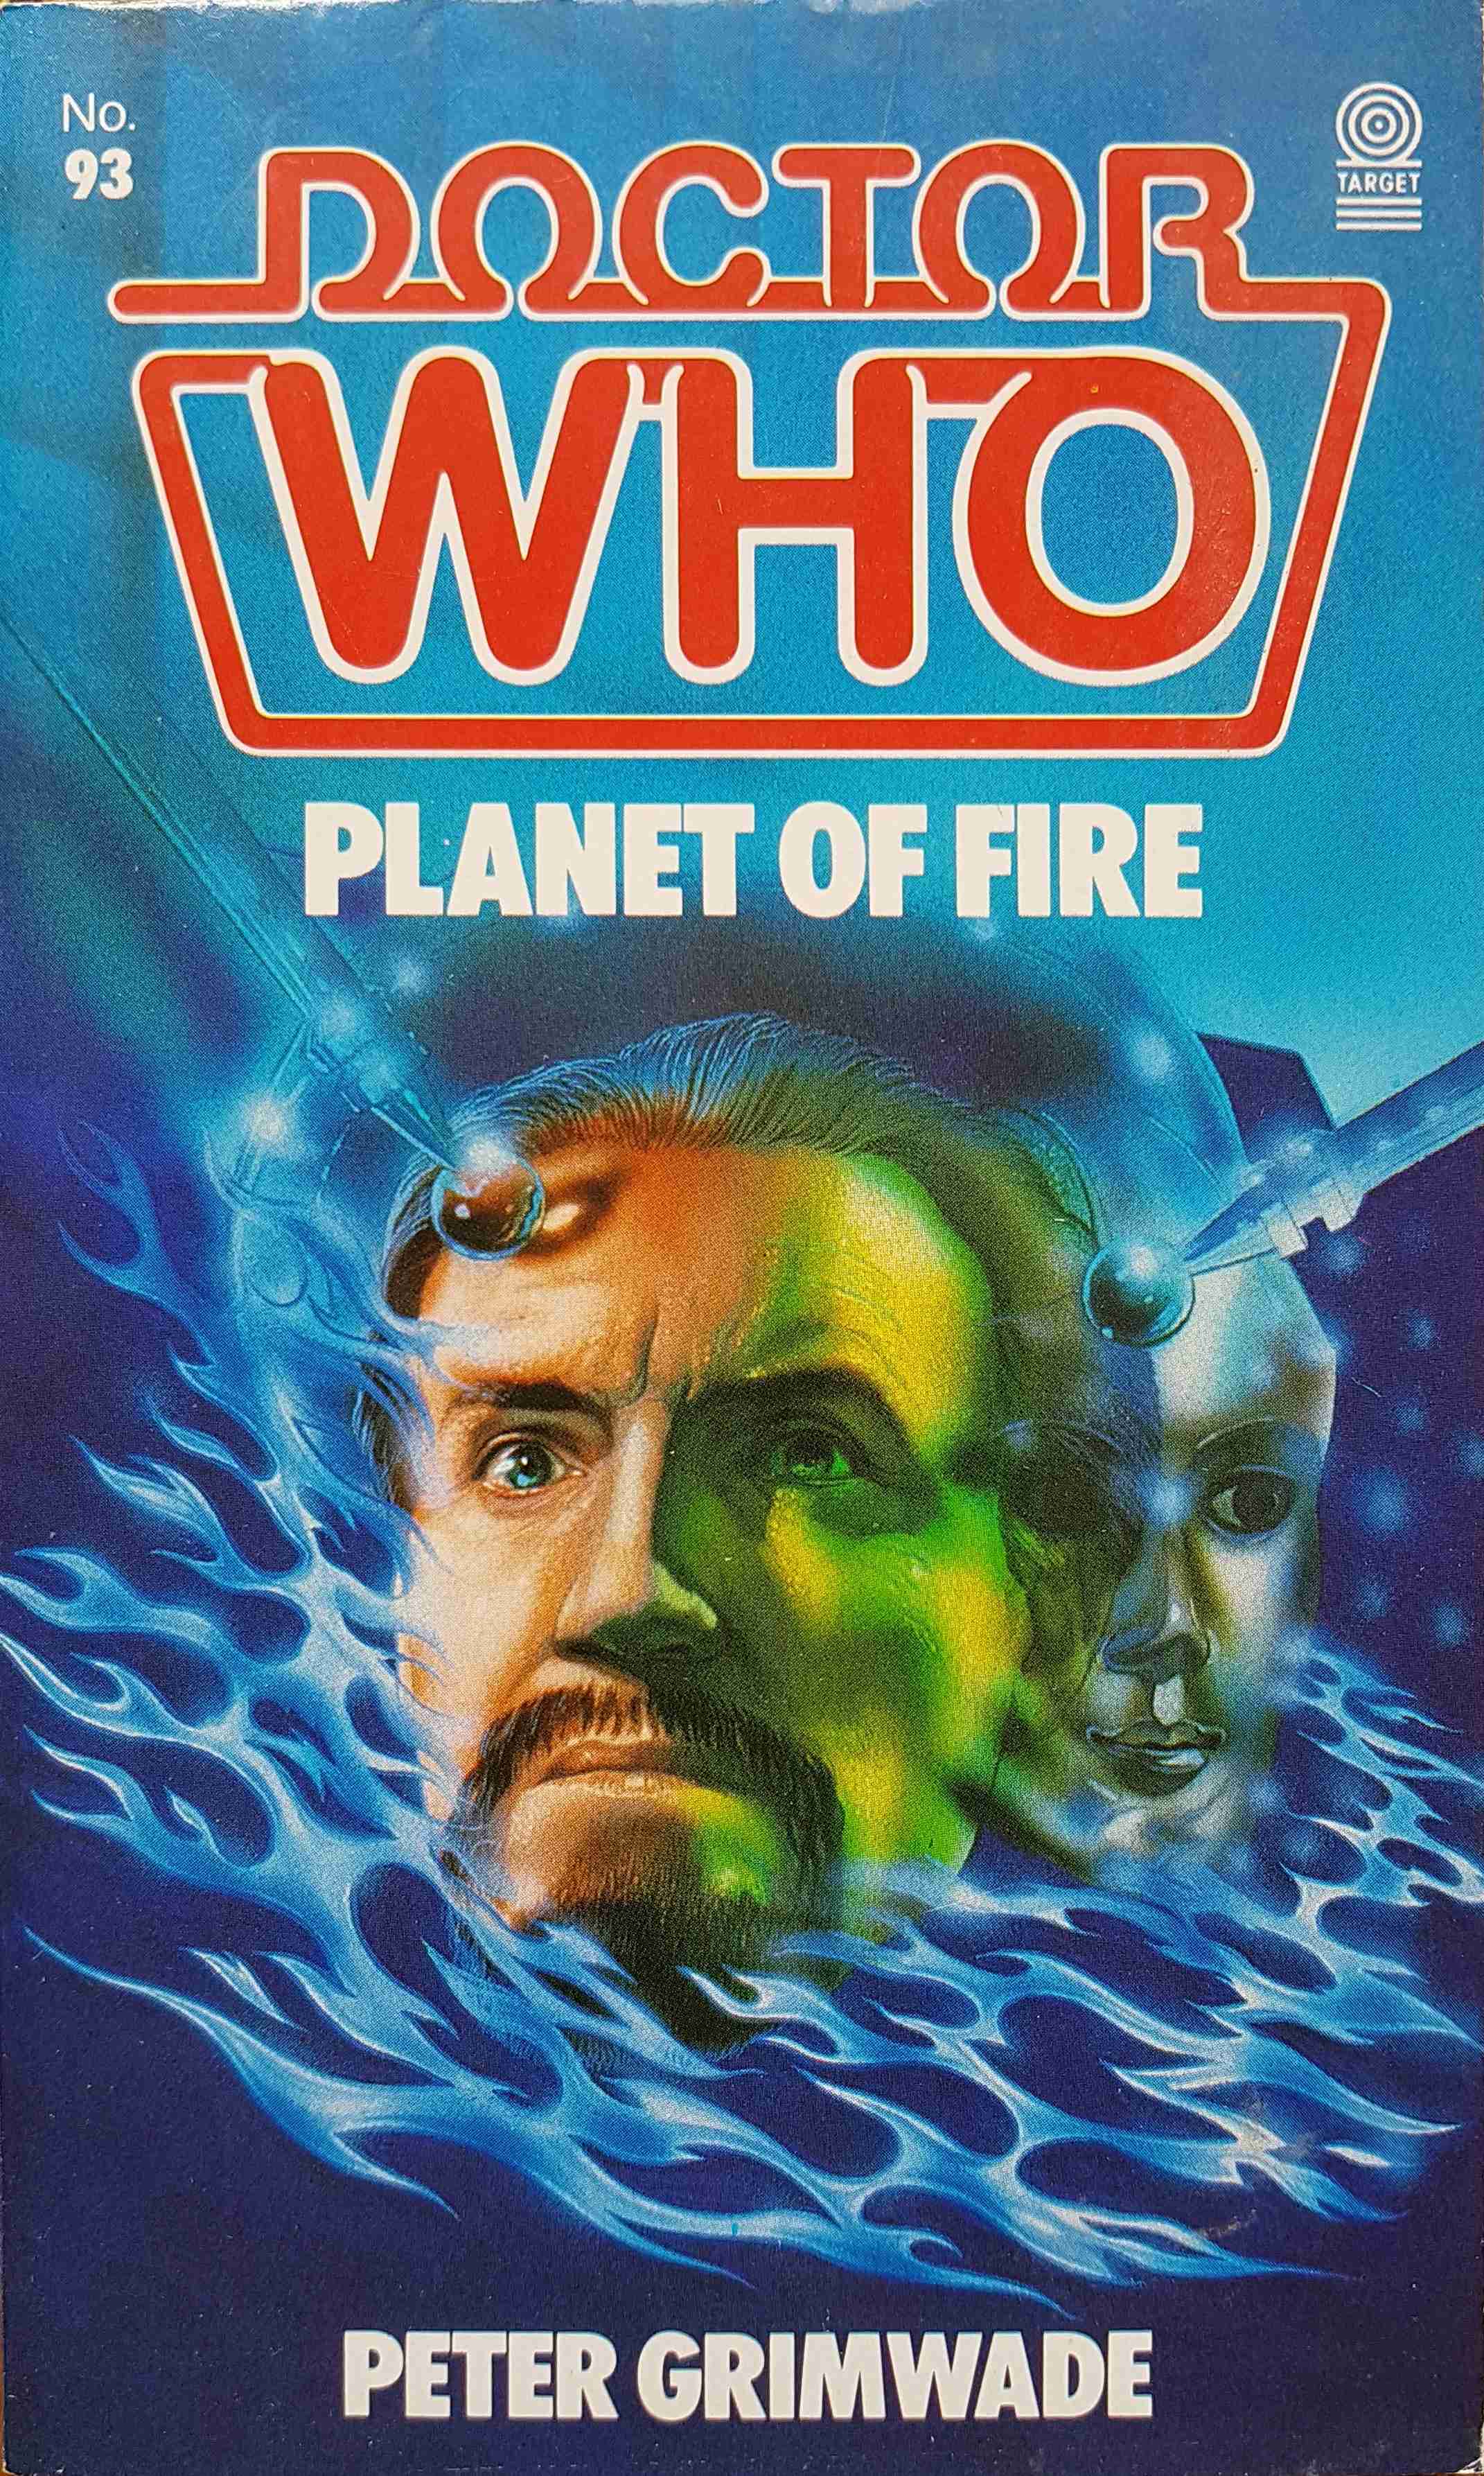 Picture of 0-426-19940-5 Doctor Who - Planet of fire by artist Peter Grimwade from the BBC books - Records and Tapes library